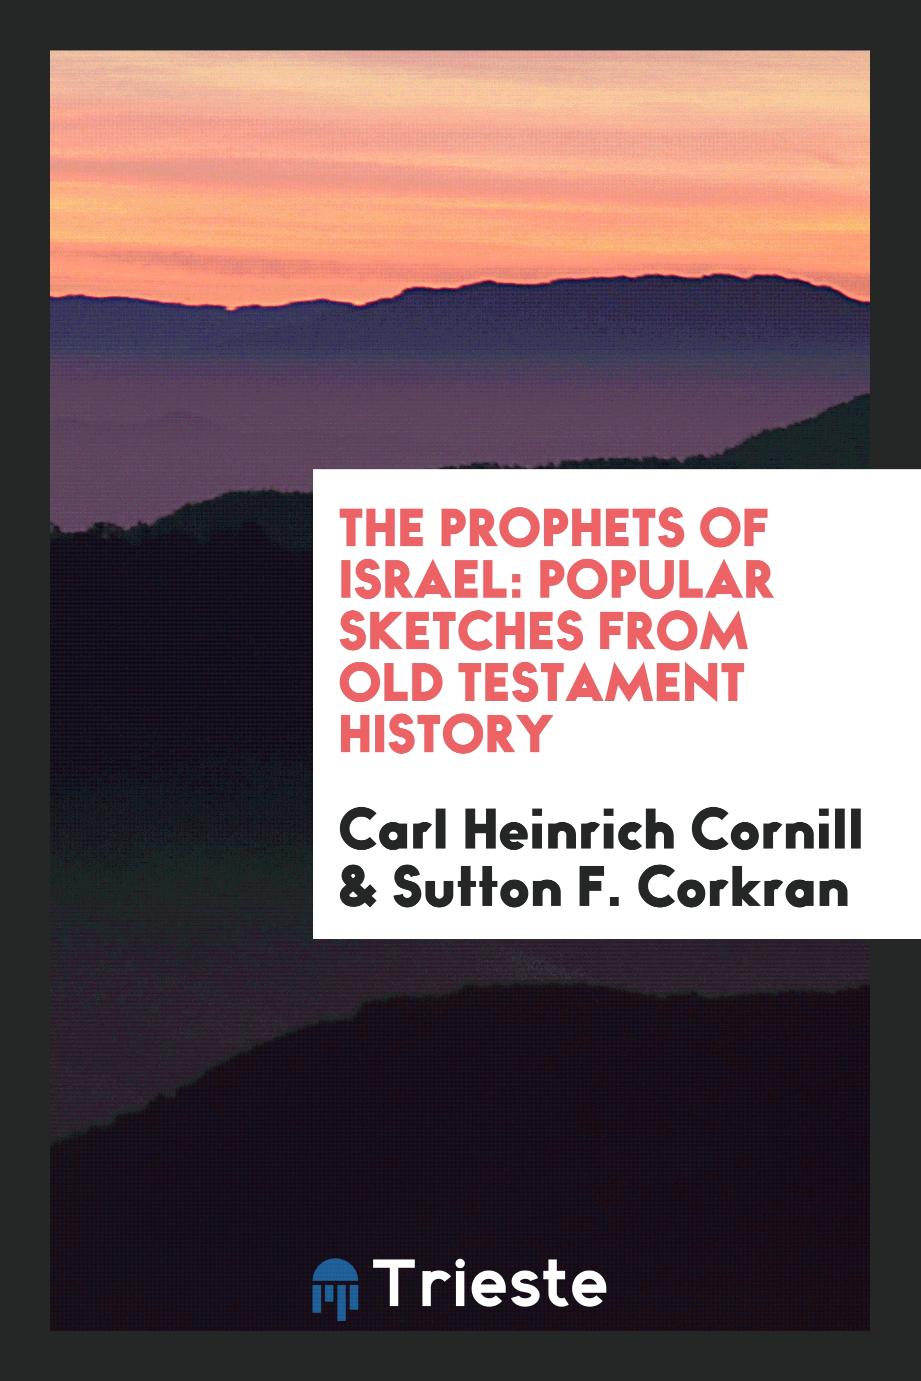 The prophets of Israel: popular sketches from Old Testament history